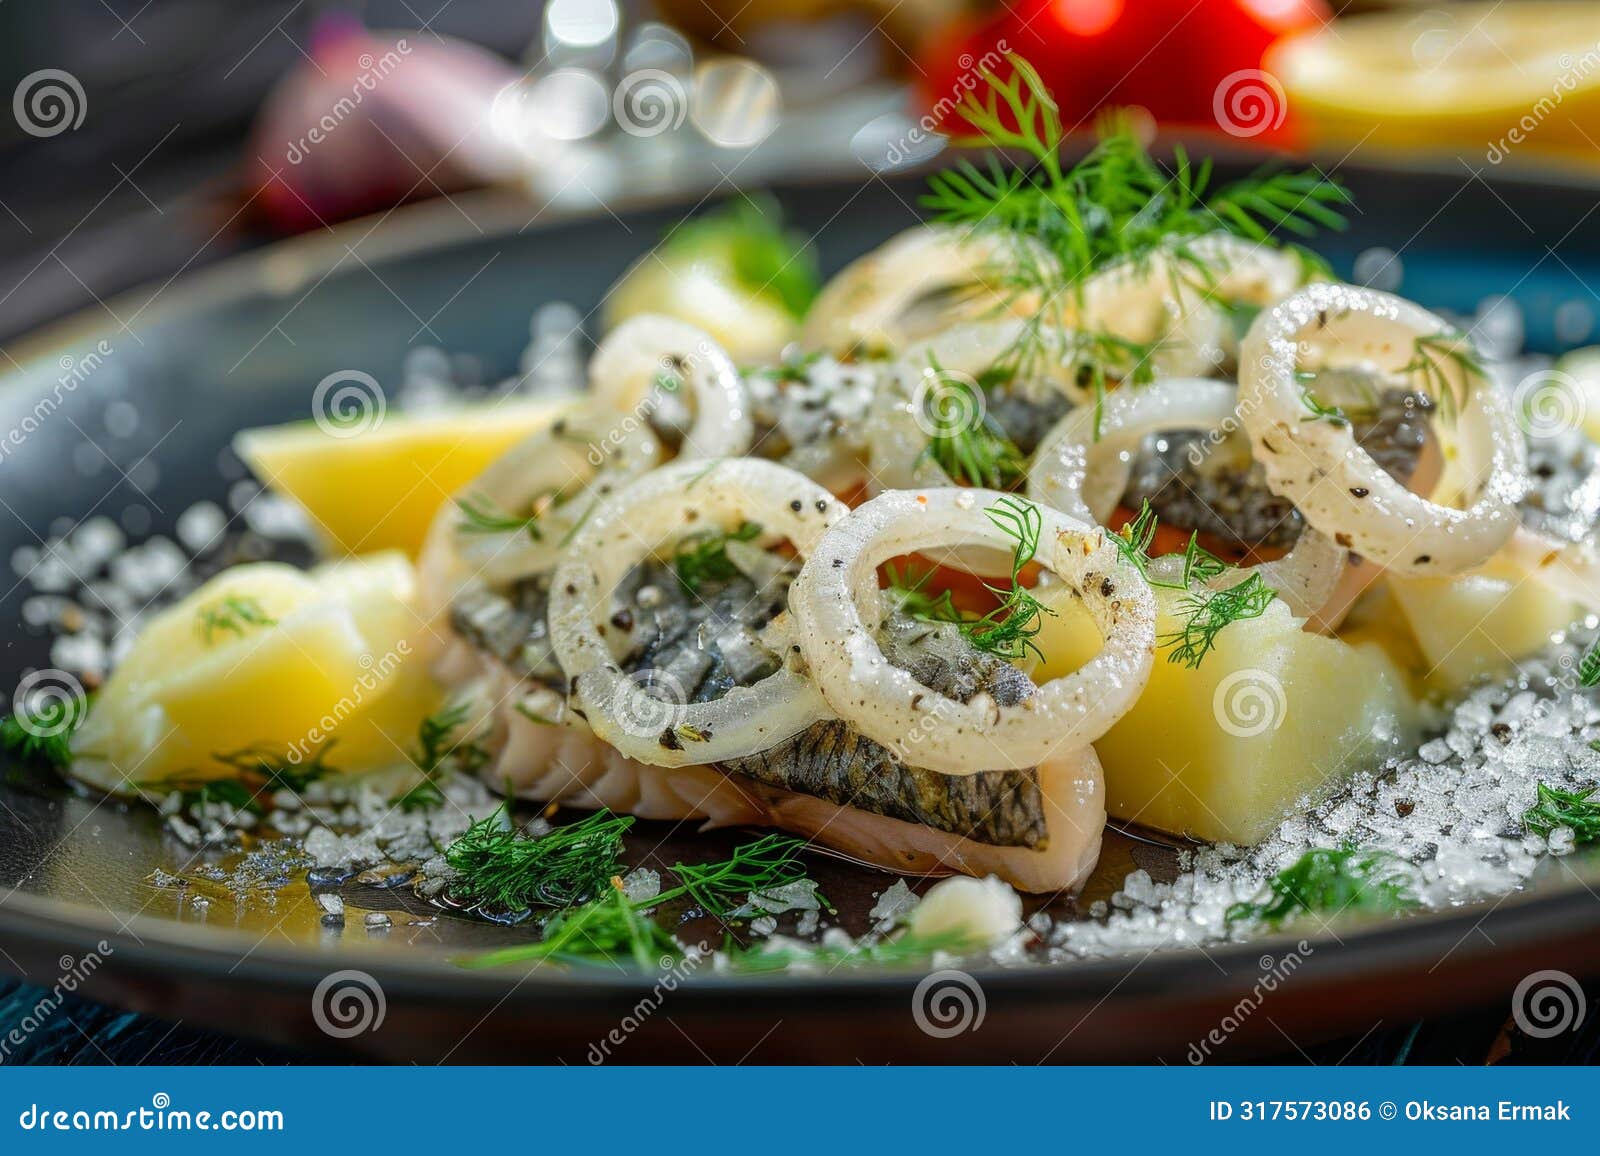 salted soused herring, raw marinated fish fillet, onion rings and boiled diced potato